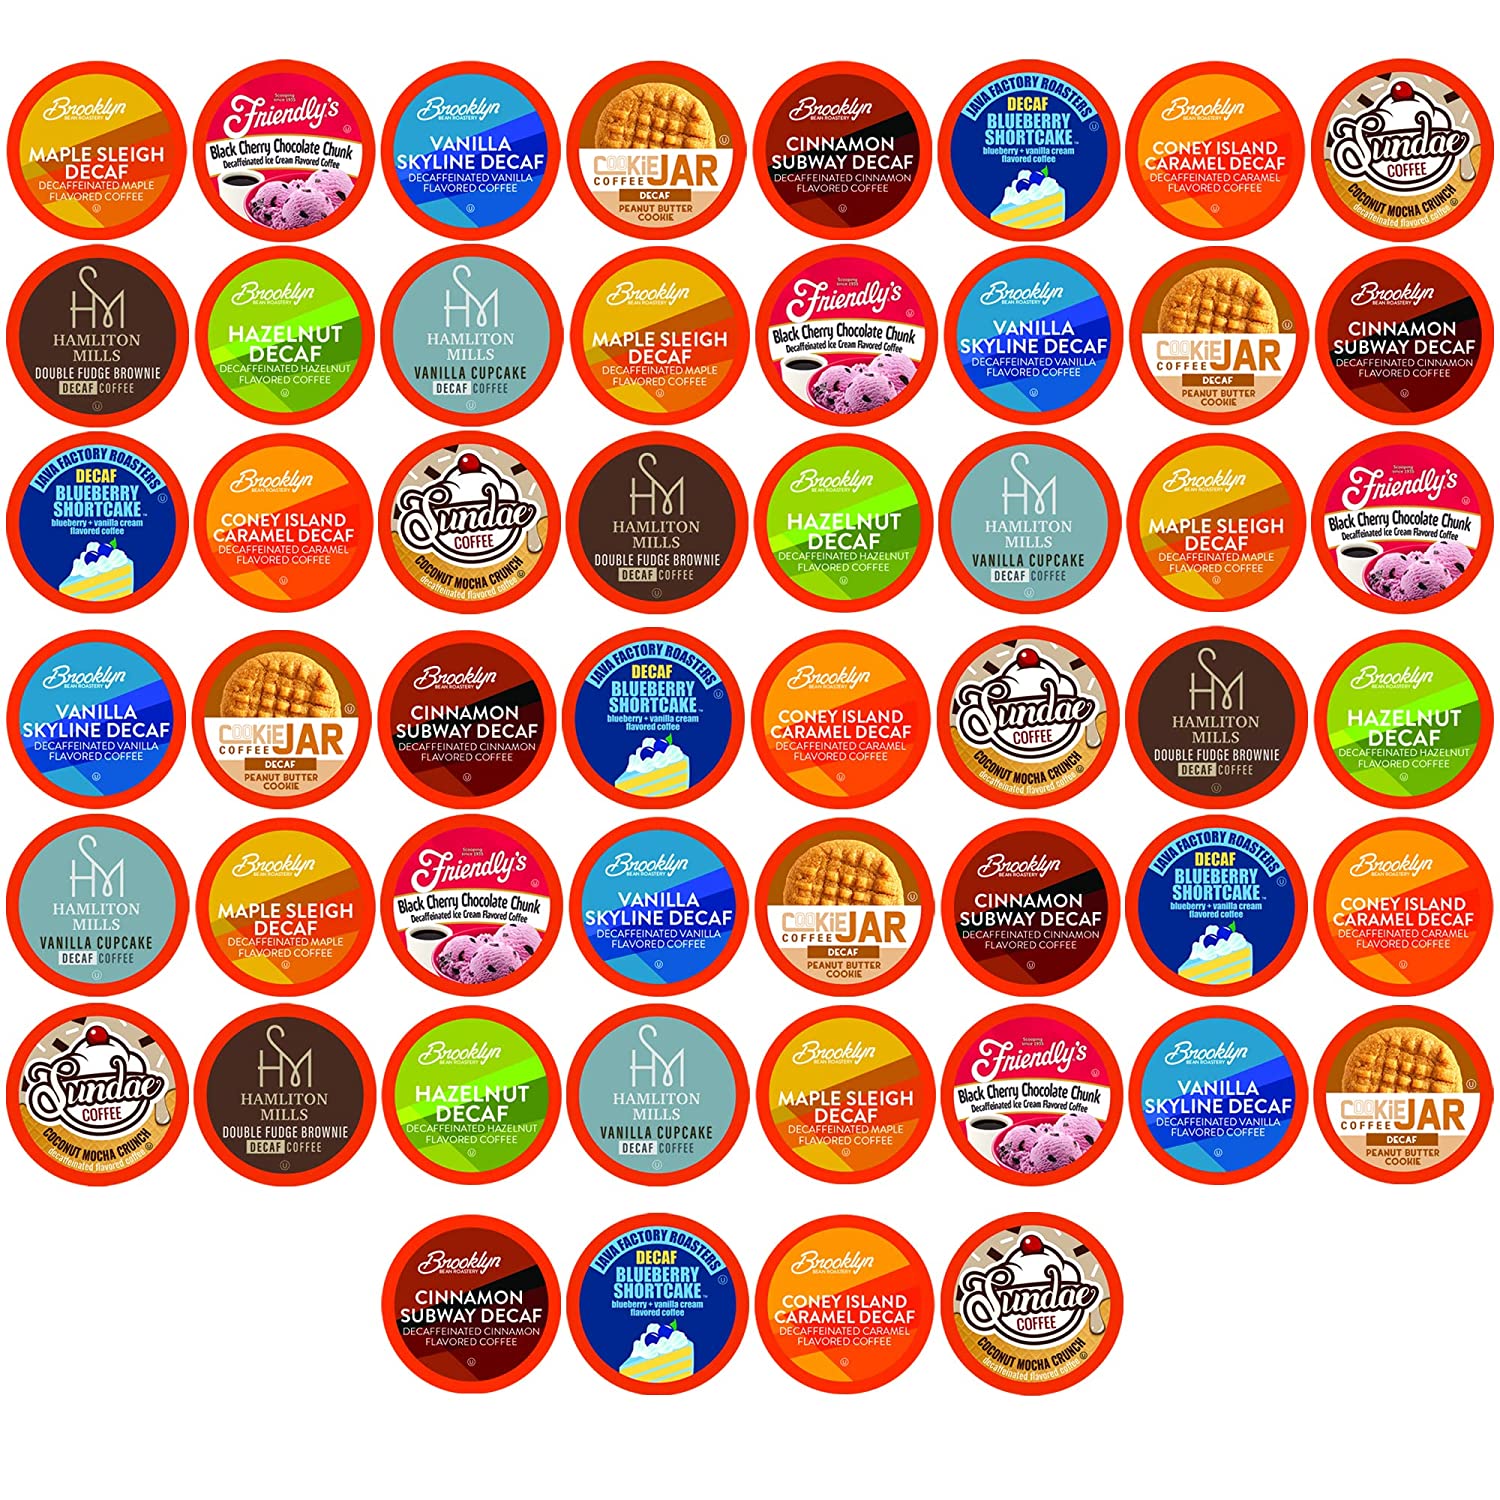 TWO RIVERS COFFEE DECAFFEINATED FLAVORED COFFEE PODS VARIETY PACK